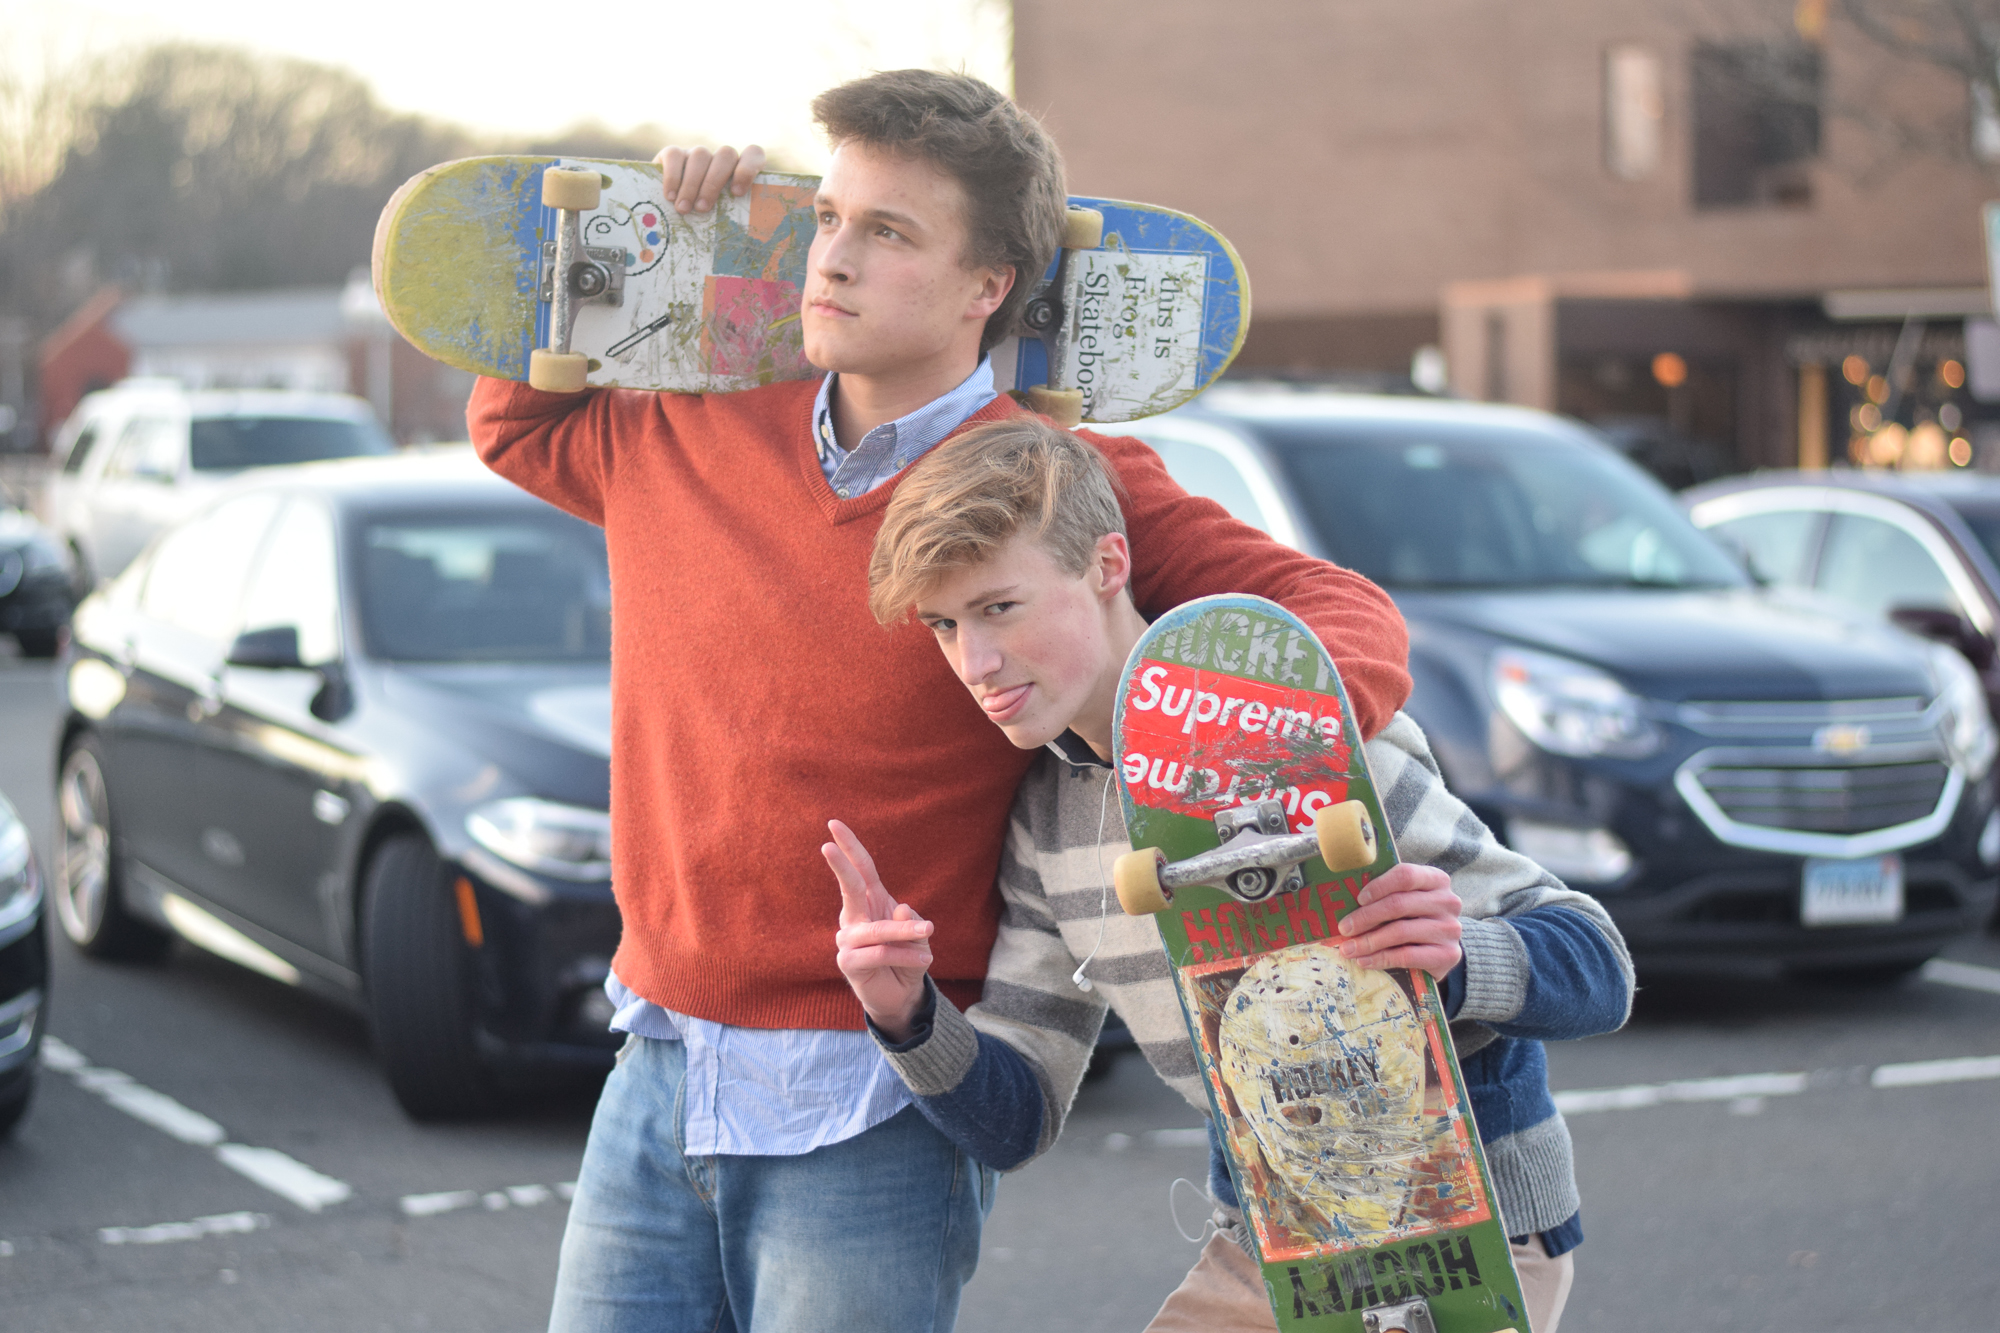 [Dec. 2016 Features] Skateboarders find community on and off the streets